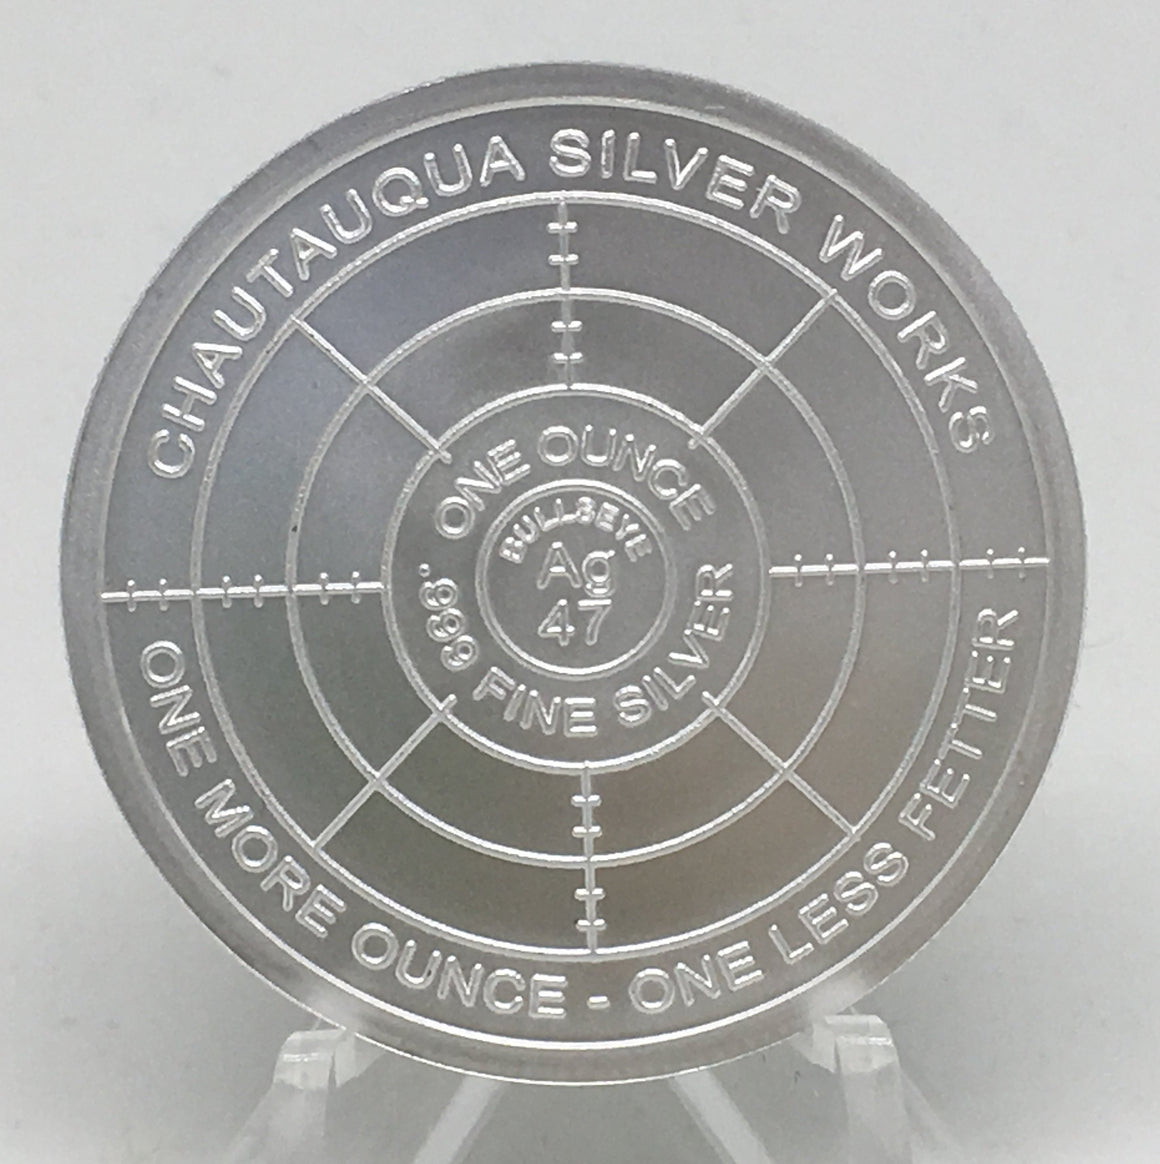 Toxic Series Too #8 Uncle Vam, BU Finish by Chautauqua Silver Works, 1oz .999 Silver Round.